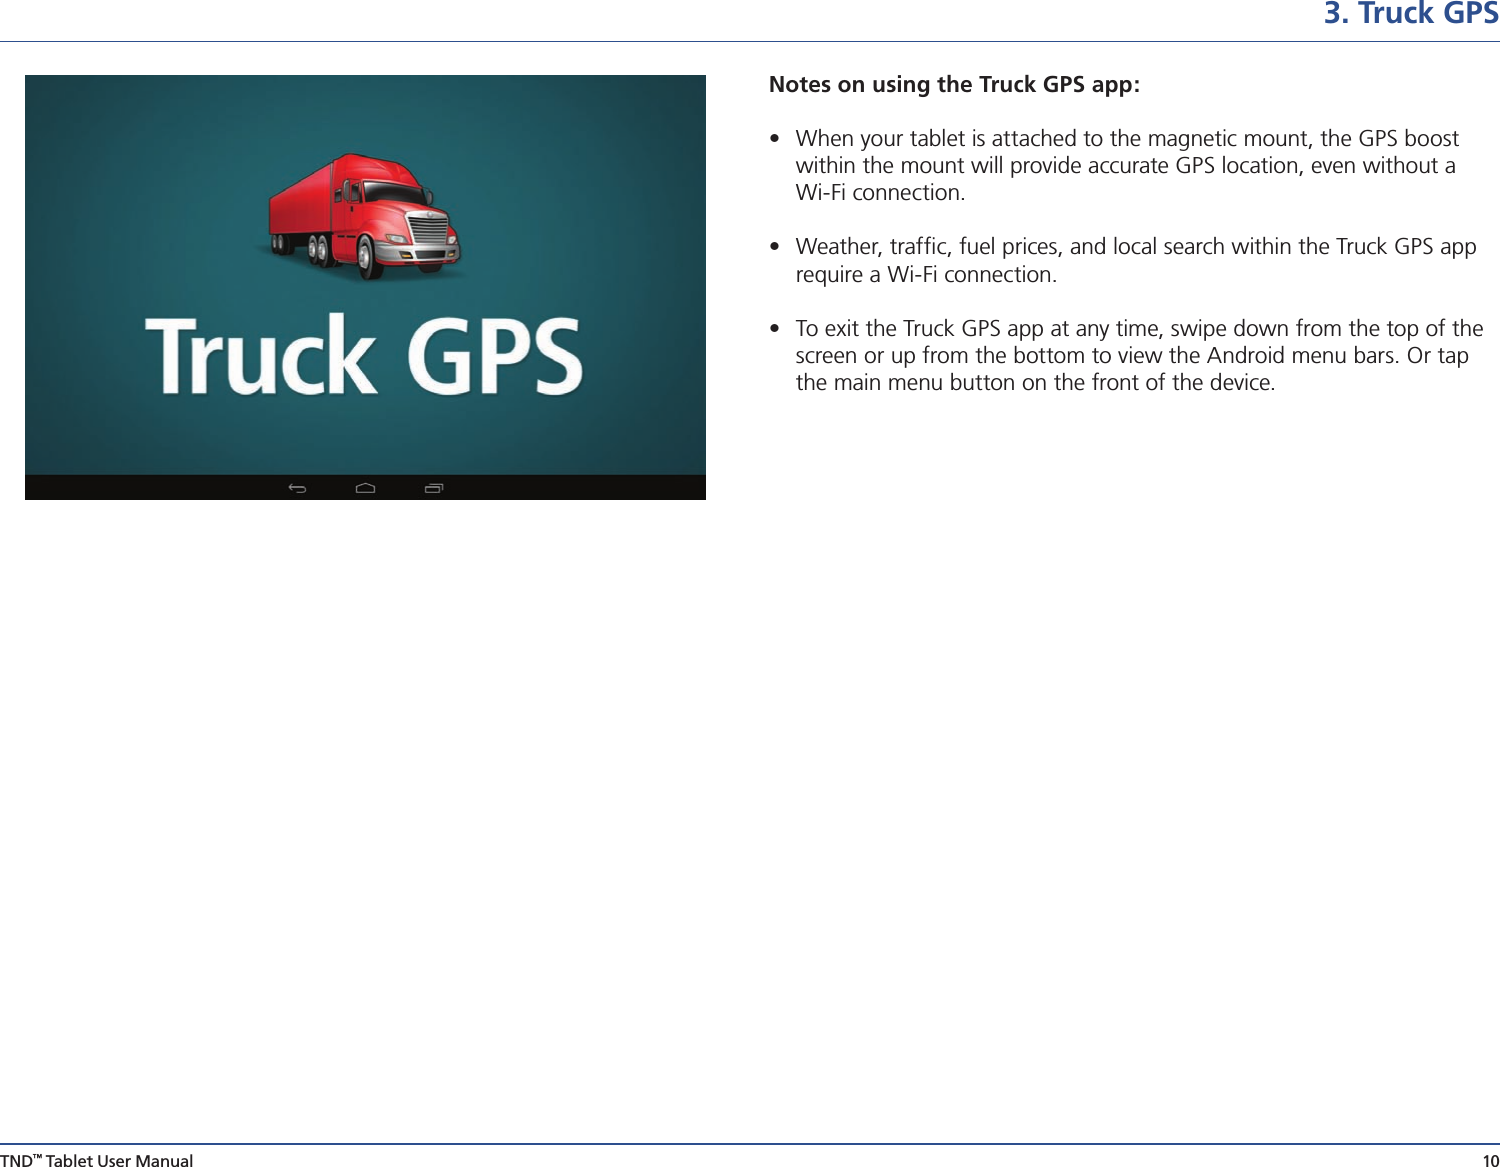 TND™ Tablet User Manual 103. Truck GPSNotes on using the Truck GPS app:  •  When your tablet is attached to the magnetic mount, the GPS boost    within the mount will provide accurate GPS location, even without a    Wi-Fi connection. •  Weather, trafﬁc, fuel prices, and local search within the Truck GPS app    require a Wi-Fi connection.•  To exit the Truck GPS app at any time, swipe down from the top of the    screen or up from the bottom to view the Android menu bars. Or tap    the main menu button on the front of the device.